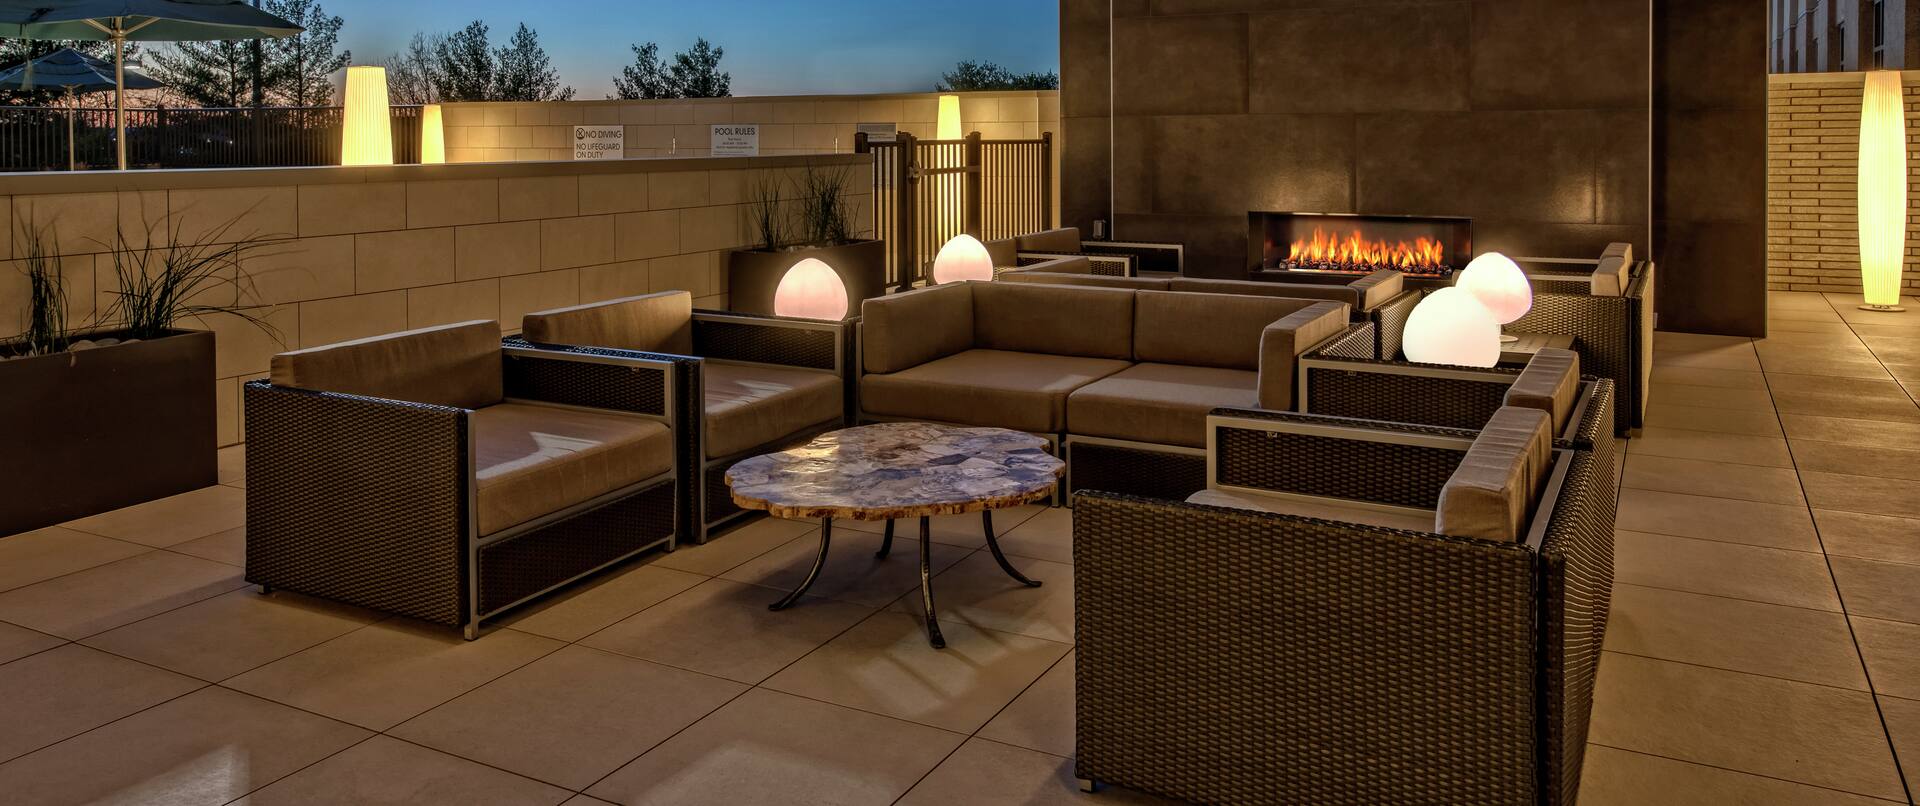 Pool Terrace Seating and Fireplace